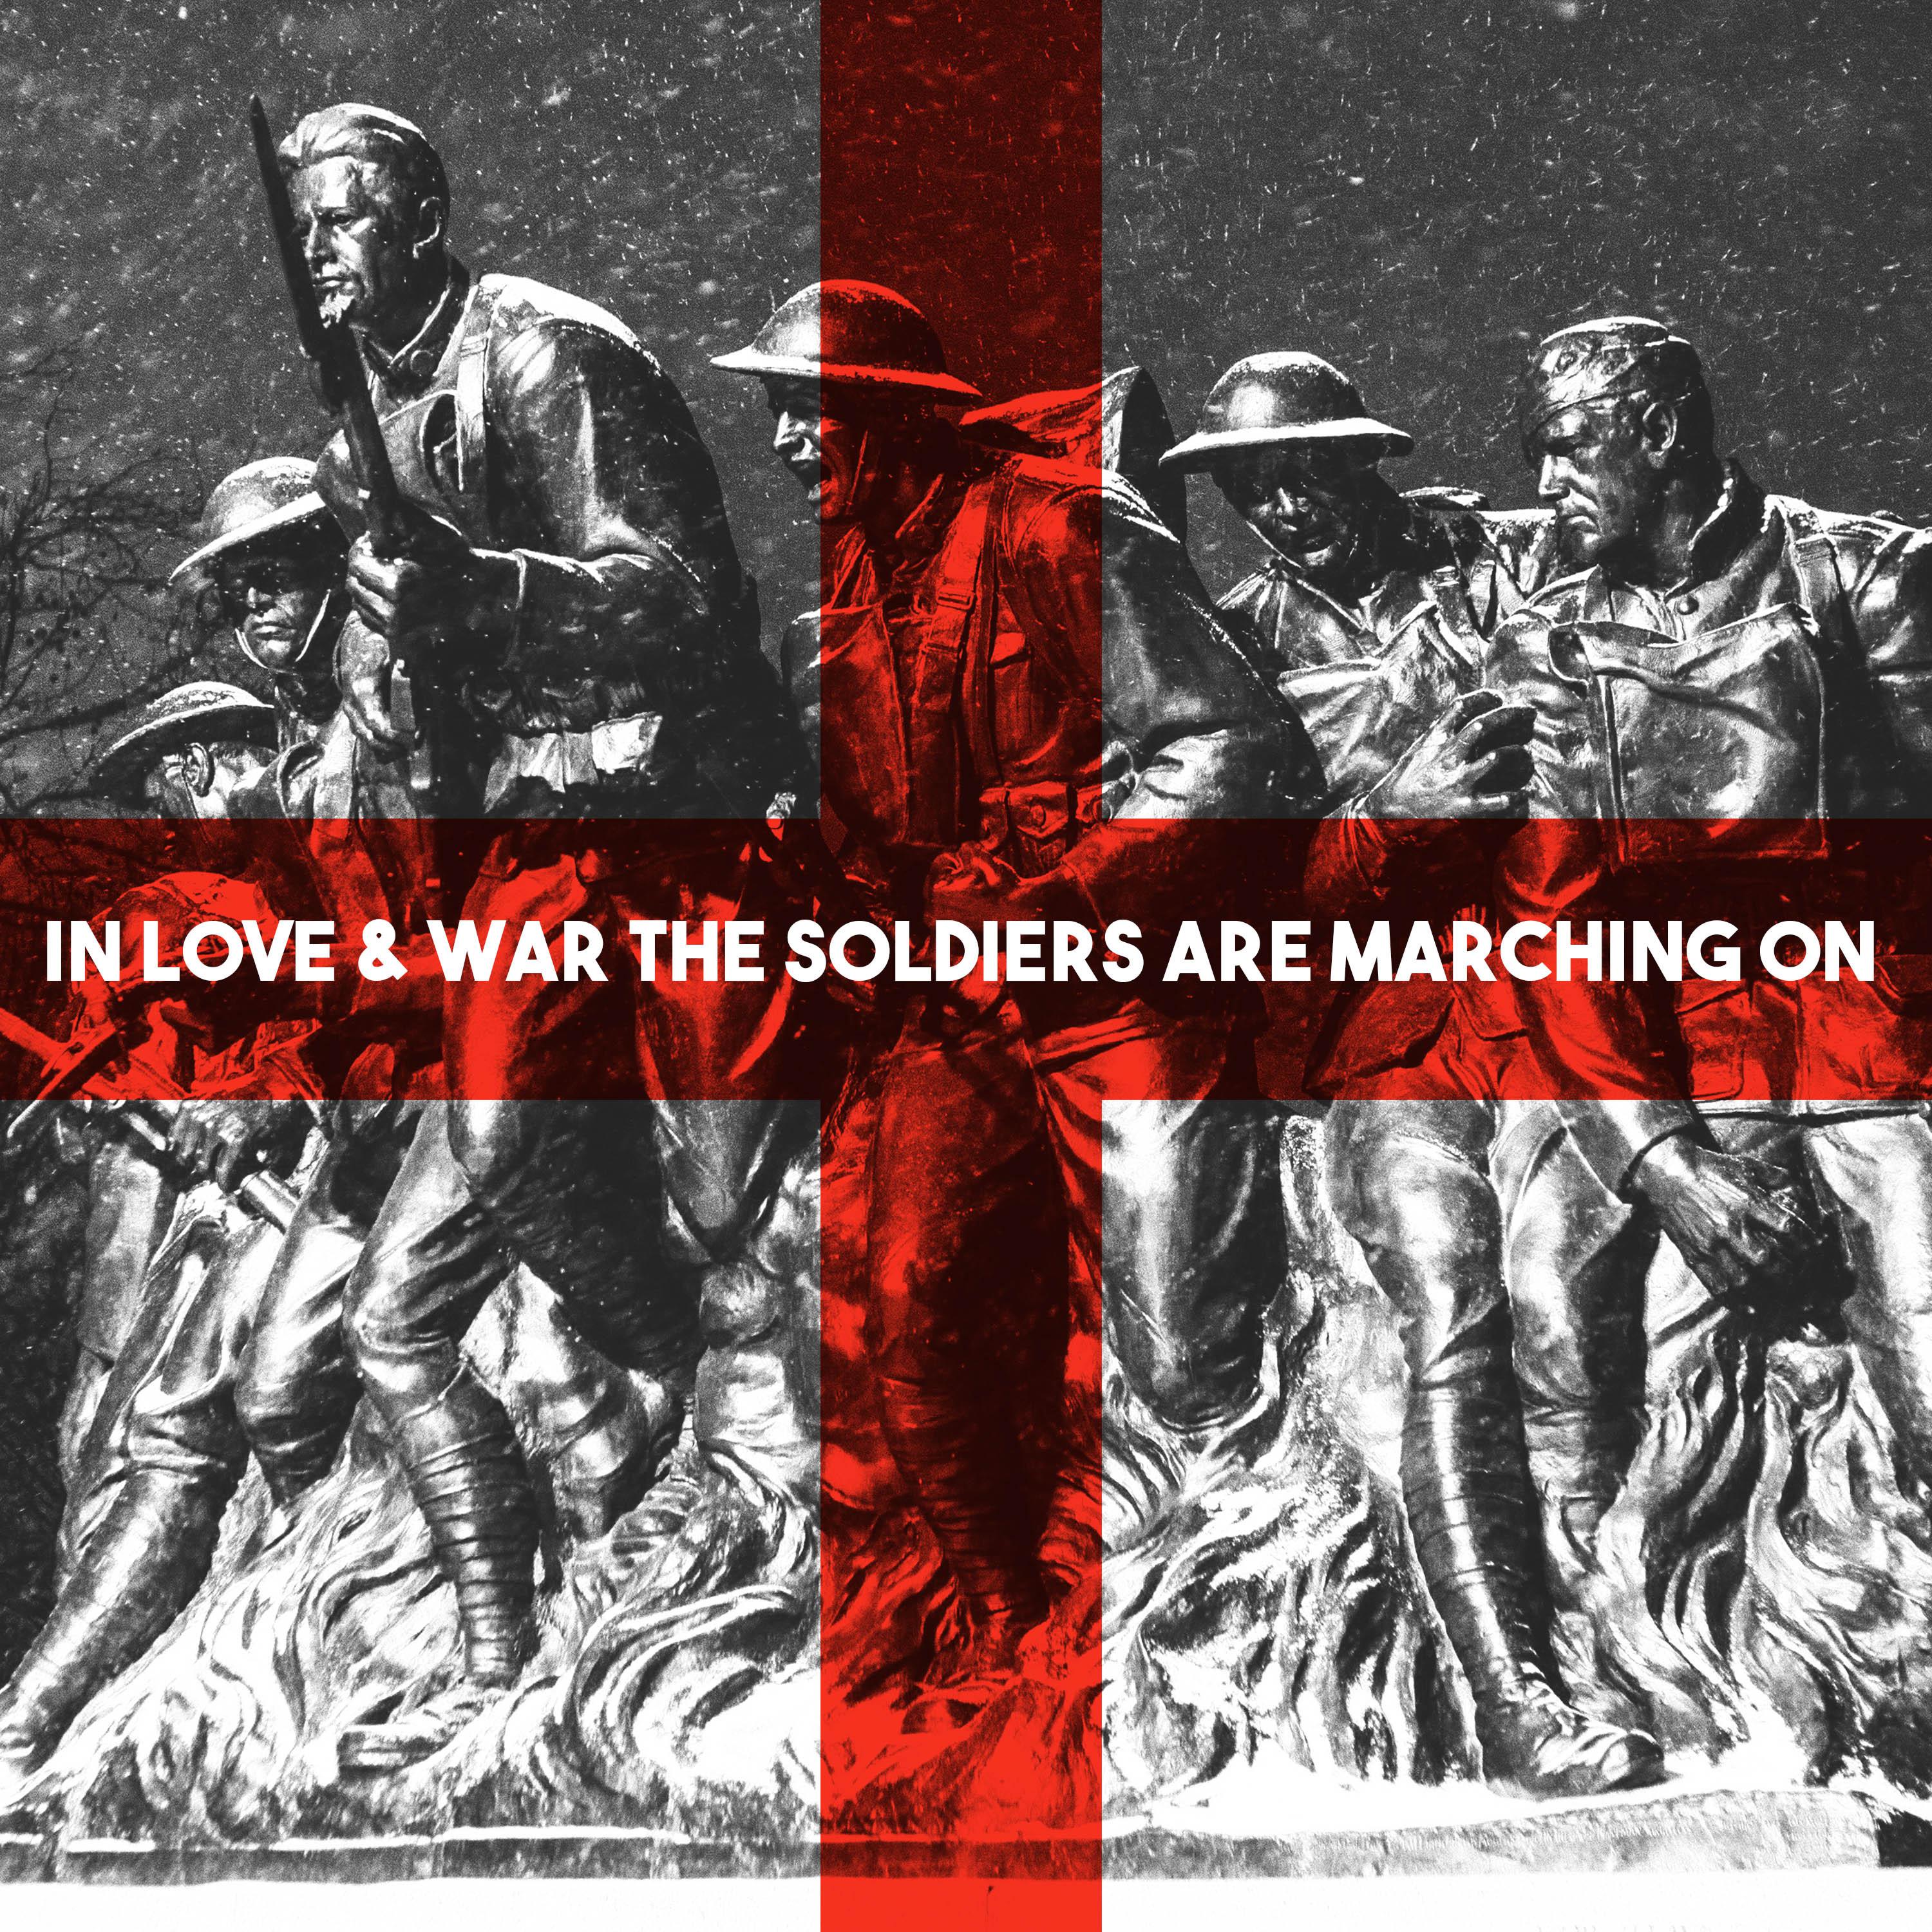 In Love & War the Soldiers Are Marching On